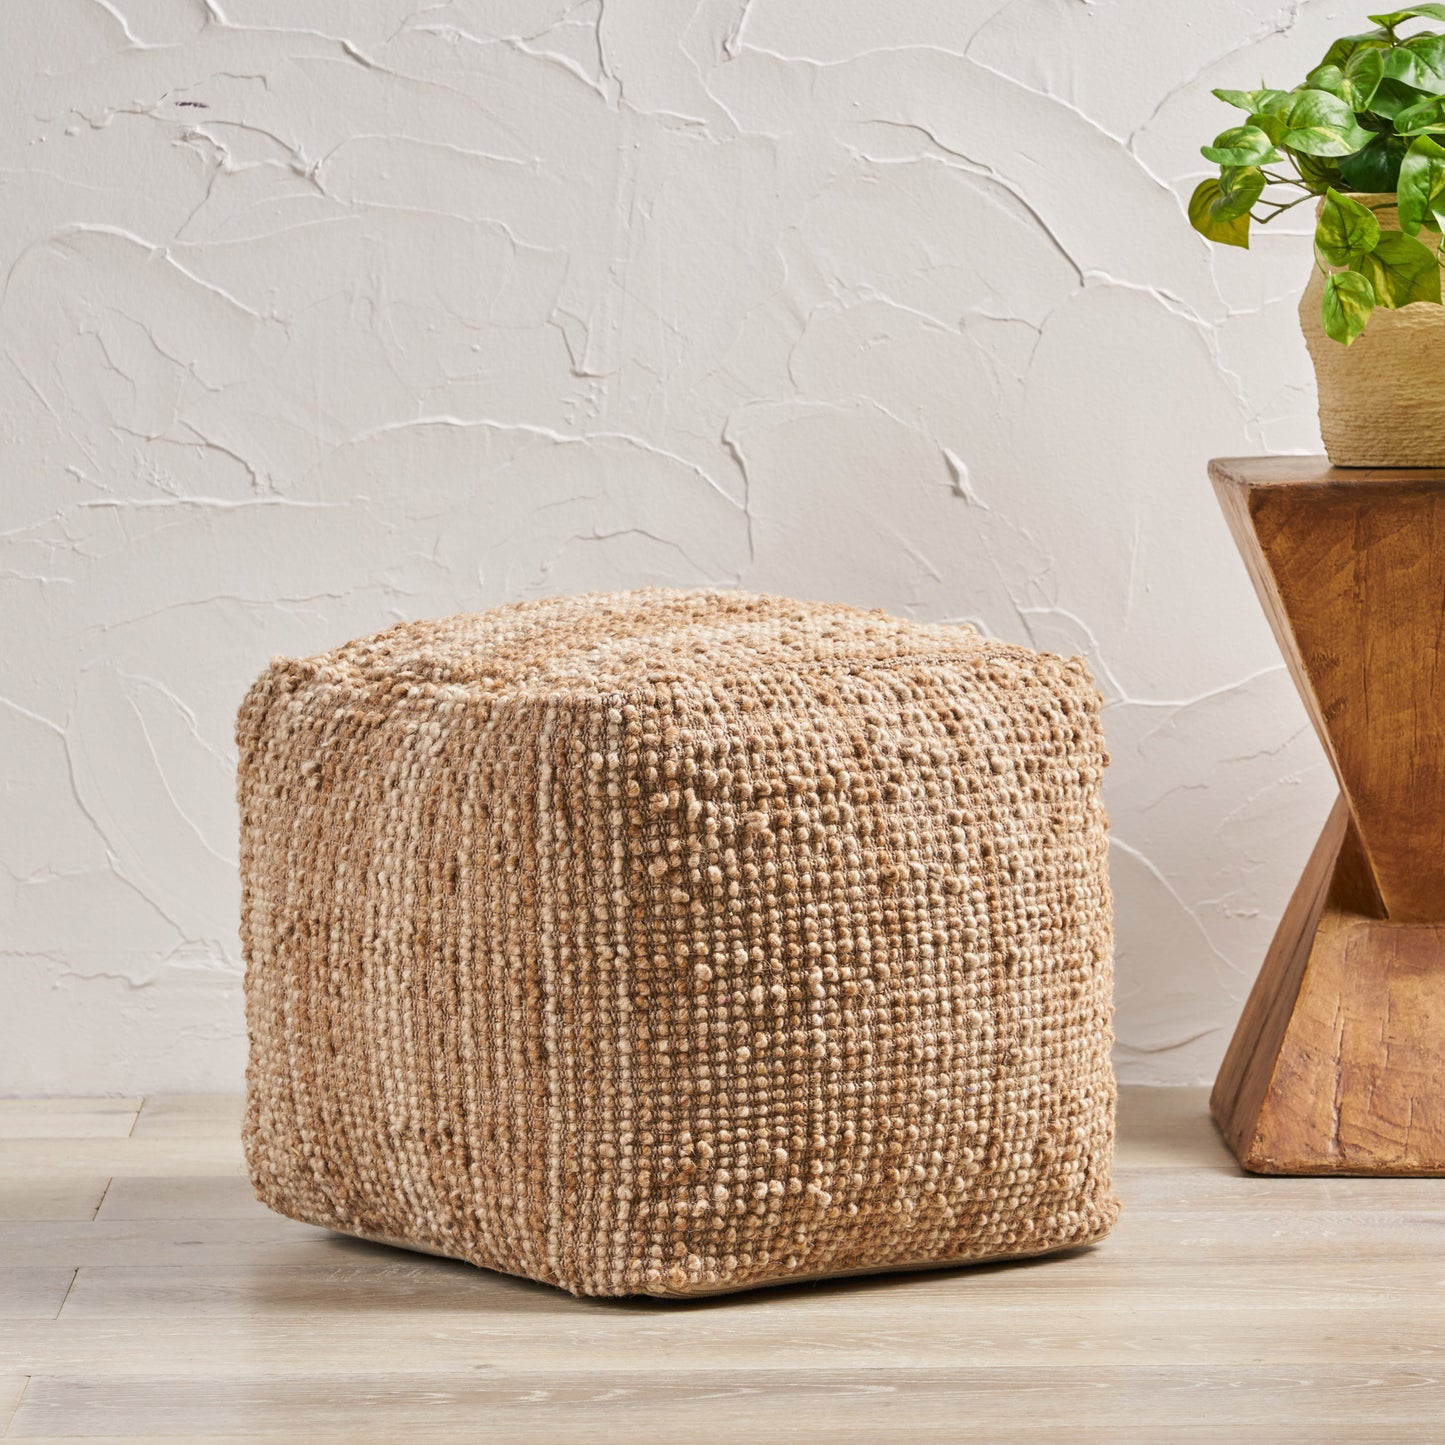 Beso Handcrafted Boho Fabric Pouf